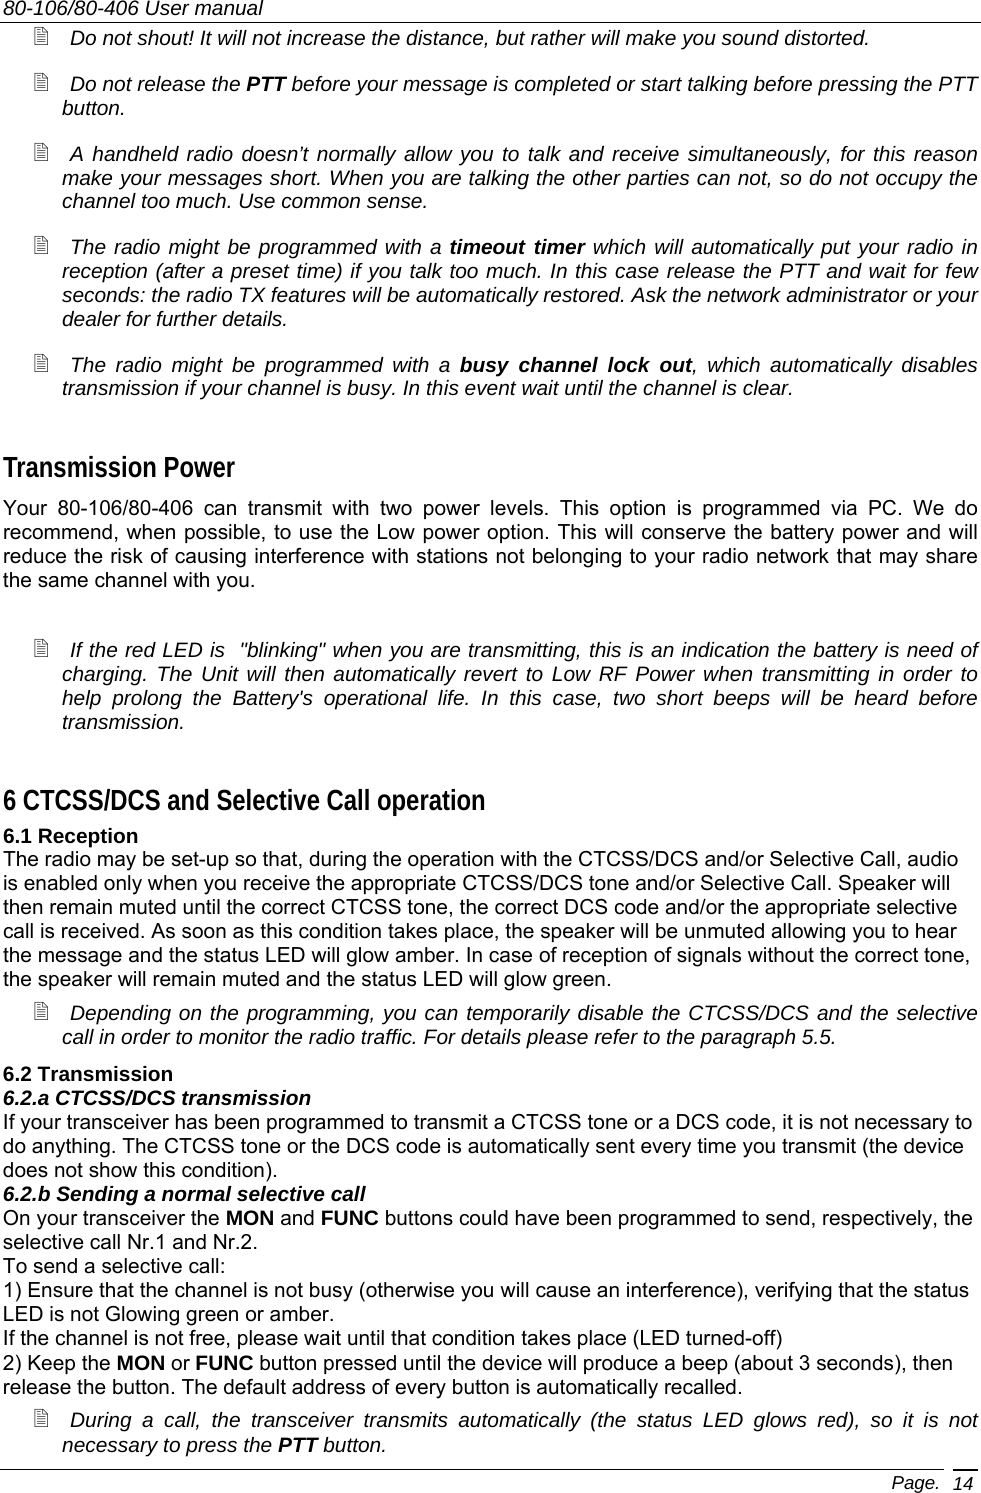 80-106/80-406 User manual Page. 14  Do not shout! It will not increase the distance, but rather will make you sound distorted.  Do not release the PTT before your message is completed or start talking before pressing the PTT button.  A handheld radio doesn’t normally allow you to talk and receive simultaneously, for this reason make your messages short. When you are talking the other parties can not, so do not occupy the channel too much. Use common sense.  The radio might be programmed with a timeout timer which will automatically put your radio in reception (after a preset time) if you talk too much. In this case release the PTT and wait for few seconds: the radio TX features will be automatically restored. Ask the network administrator or your dealer for further details.  The radio might be programmed with a busy channel lock out, which automatically disables transmission if your channel is busy. In this event wait until the channel is clear. Transmission Power Your 80-106/80-406 can transmit with two power levels. This option is programmed via PC. We do recommend, when possible, to use the Low power option. This will conserve the battery power and will reduce the risk of causing interference with stations not belonging to your radio network that may share the same channel with you.   If the red LED is  &quot;blinking&quot; when you are transmitting, this is an indication the battery is need of charging. The Unit will then automatically revert to Low RF Power when transmitting in order to help prolong the Battery&apos;s operational life. In this case, two short beeps will be heard before transmission. 6 CTCSS/DCS and Selective Call operation 6.1 Reception The radio may be set-up so that, during the operation with the CTCSS/DCS and/or Selective Call, audio is enabled only when you receive the appropriate CTCSS/DCS tone and/or Selective Call. Speaker will then remain muted until the correct CTCSS tone, the correct DCS code and/or the appropriate selective call is received. As soon as this condition takes place, the speaker will be unmuted allowing you to hear the message and the status LED will glow amber. In case of reception of signals without the correct tone, the speaker will remain muted and the status LED will glow green.  Depending on the programming, you can temporarily disable the CTCSS/DCS and the selective call in order to monitor the radio traffic. For details please refer to the paragraph 5.5. 6.2 Transmission 6.2.a CTCSS/DCS transmission If your transceiver has been programmed to transmit a CTCSS tone or a DCS code, it is not necessary to do anything. The CTCSS tone or the DCS code is automatically sent every time you transmit (the device does not show this condition). 6.2.b Sending a normal selective call On your transceiver the MON and FUNC buttons could have been programmed to send, respectively, the selective call Nr.1 and Nr.2. To send a selective call: 1) Ensure that the channel is not busy (otherwise you will cause an interference), verifying that the status LED is not Glowing green or amber. If the channel is not free, please wait until that condition takes place (LED turned-off) 2) Keep the MON or FUNC button pressed until the device will produce a beep (about 3 seconds), then release the button. The default address of every button is automatically recalled.  During a call, the transceiver transmits automatically (the status LED glows red), so it is not necessary to press the PTT button. 